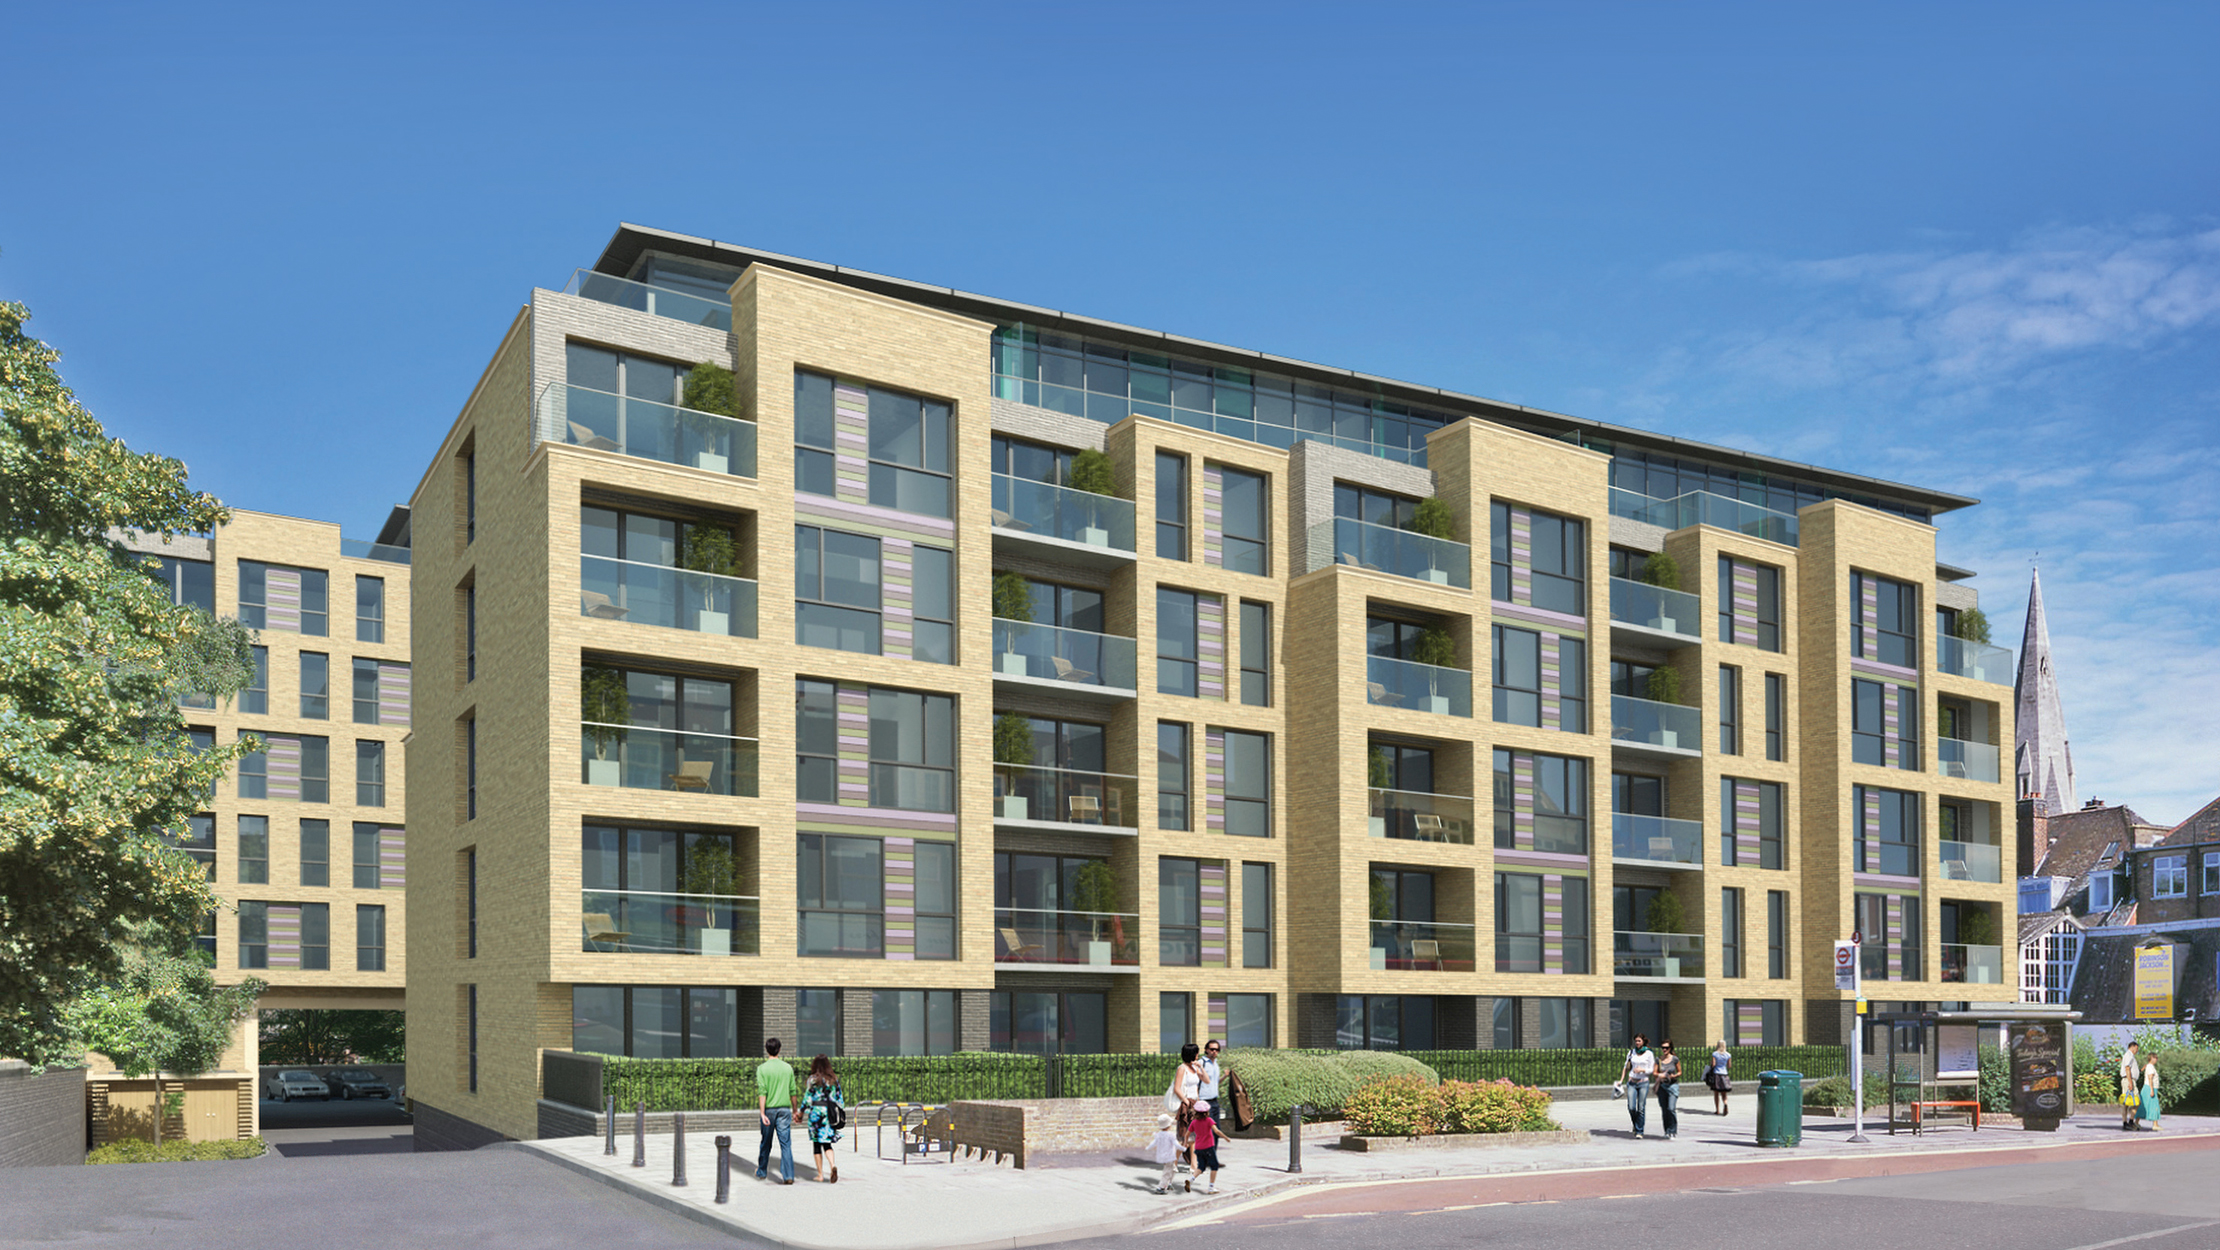 Introducing Grove Place in Eltham